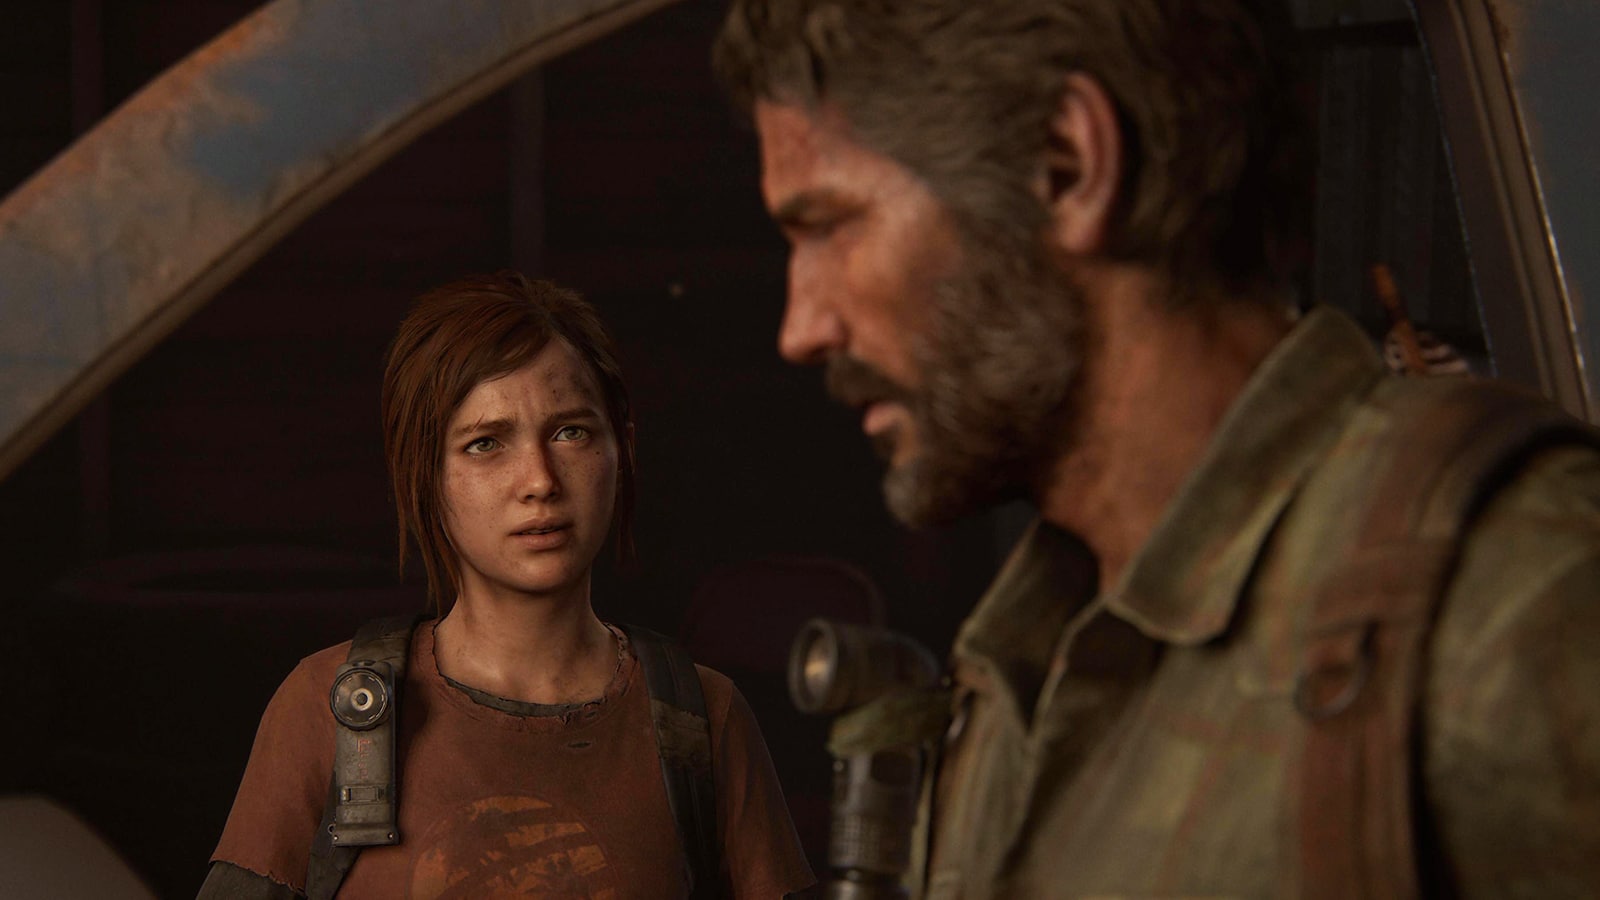 The Last Of Us' remake gets PS5 launch date with PC port in